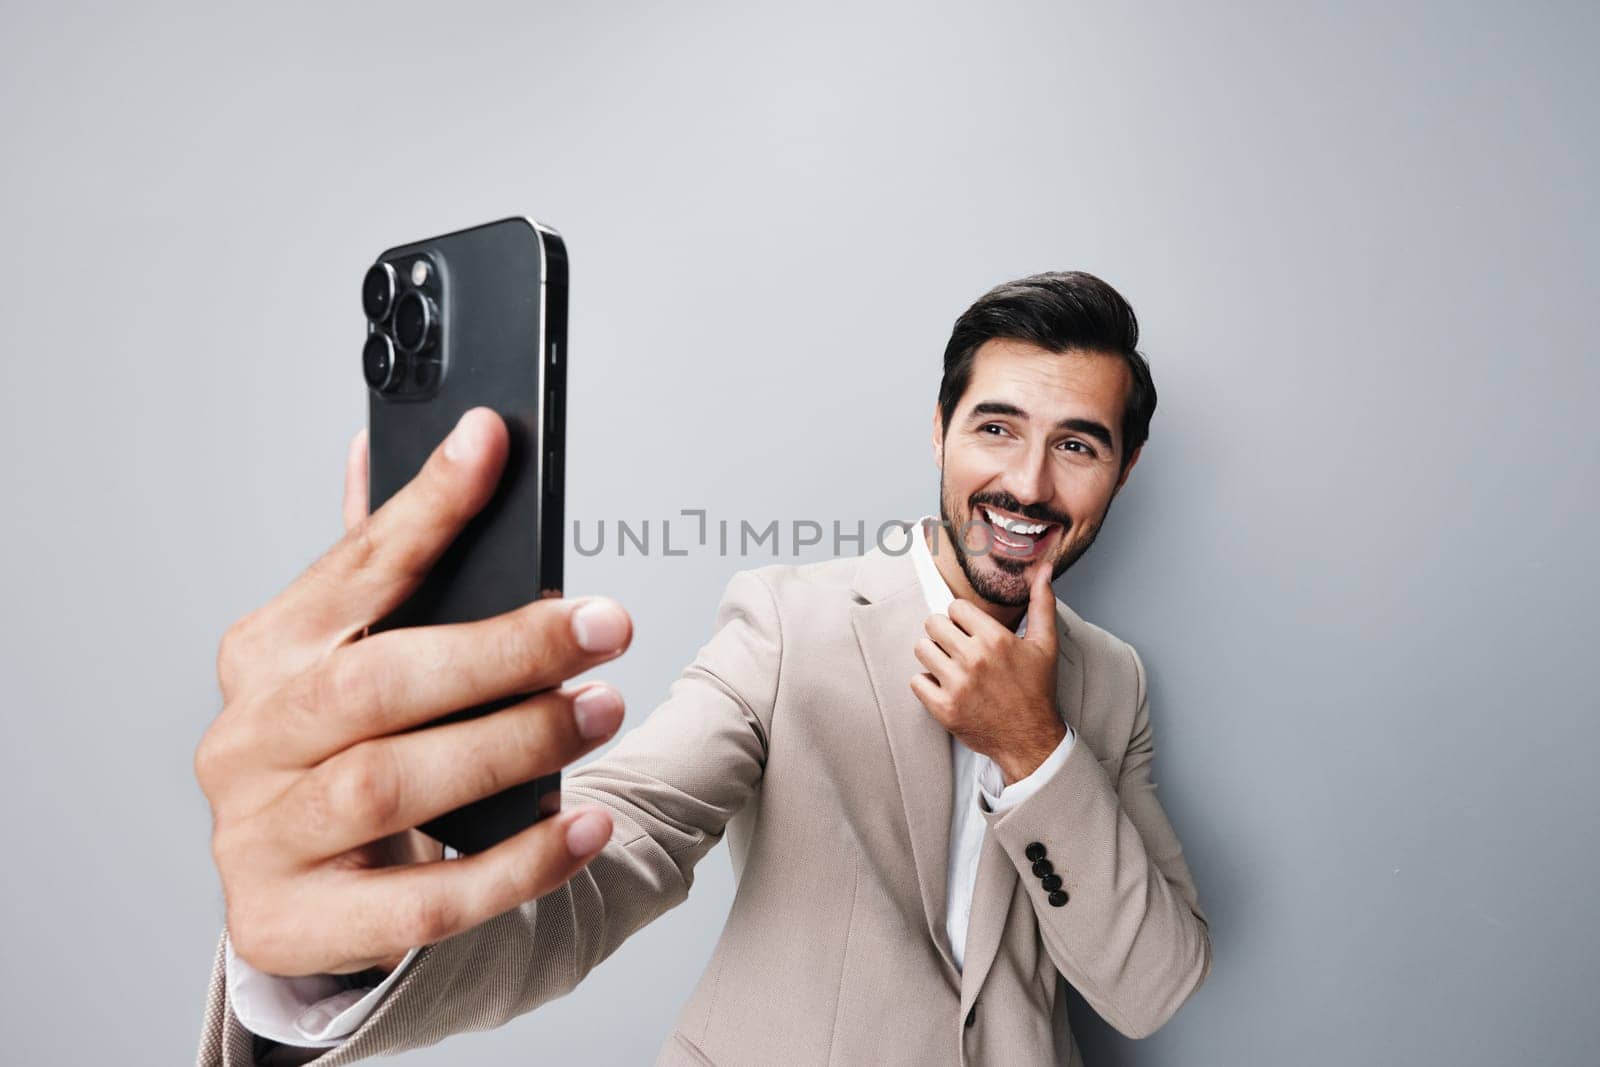 man connection portrait business phone smartphone studio happy call mobile smile handsome lifestyle cell hold trading internet suit holding application phone mobile